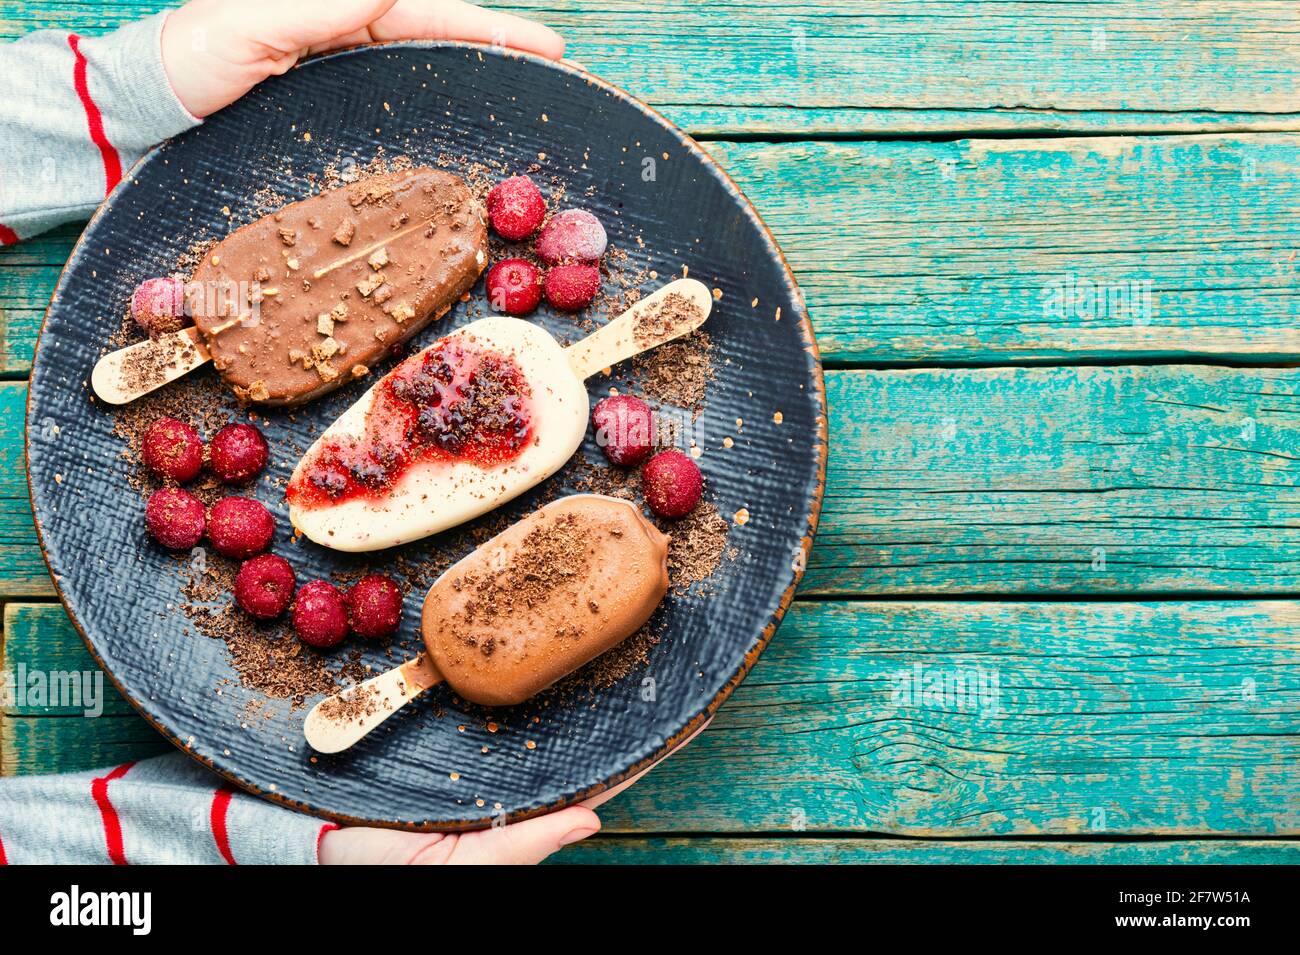 Chocolate covered ice cream with cherry jam on wooden table.Hand holding ice cream Stock Photo